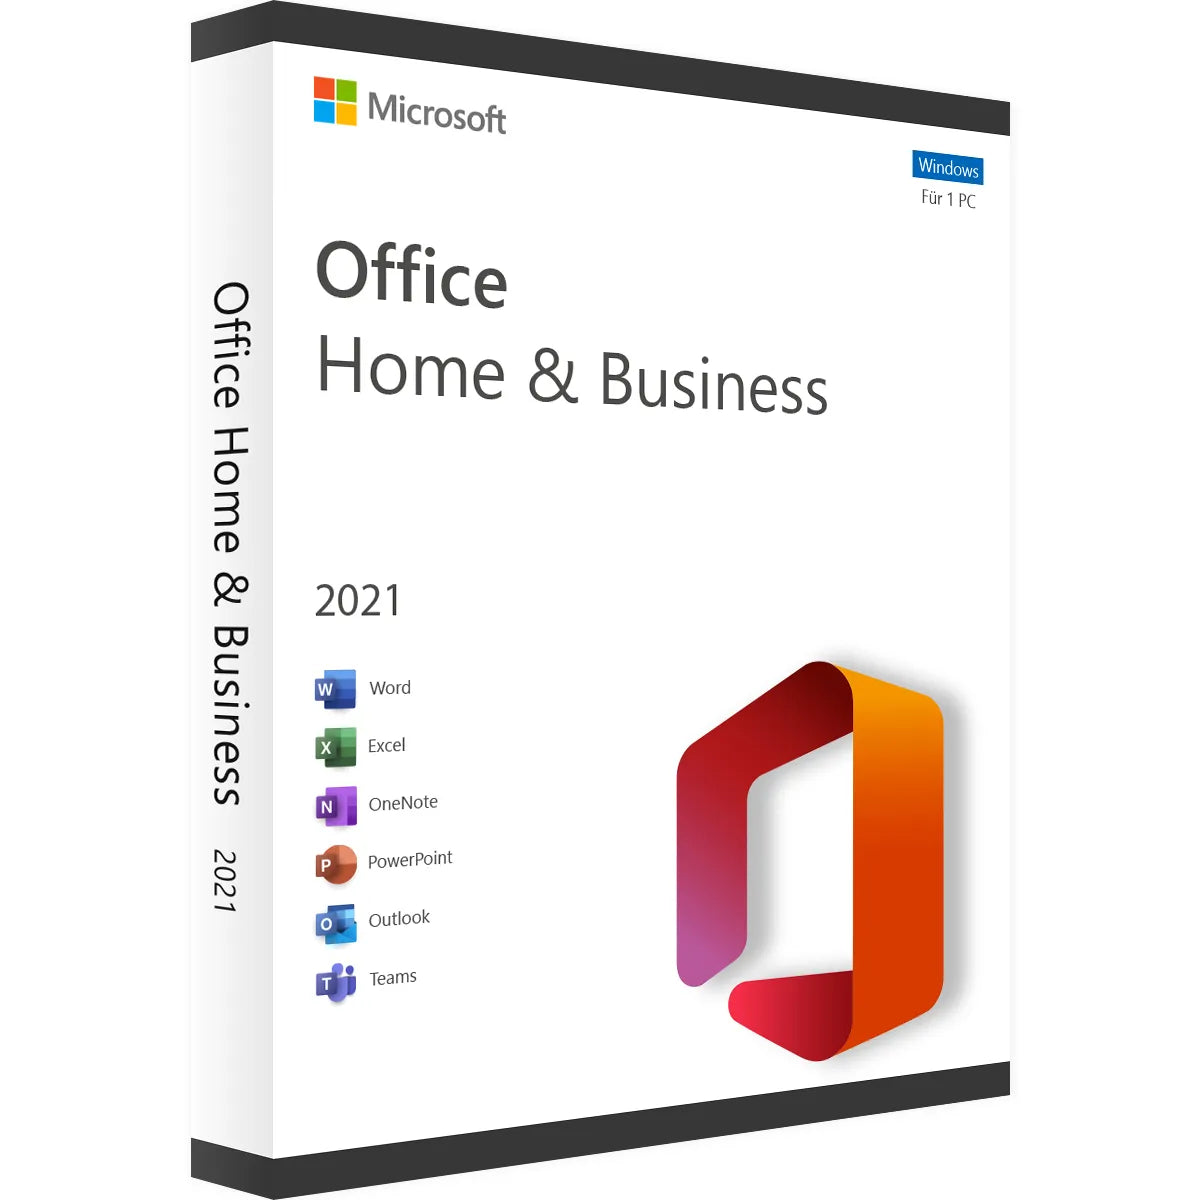 Microsoft Office Home & Business 2021 Lifetime License